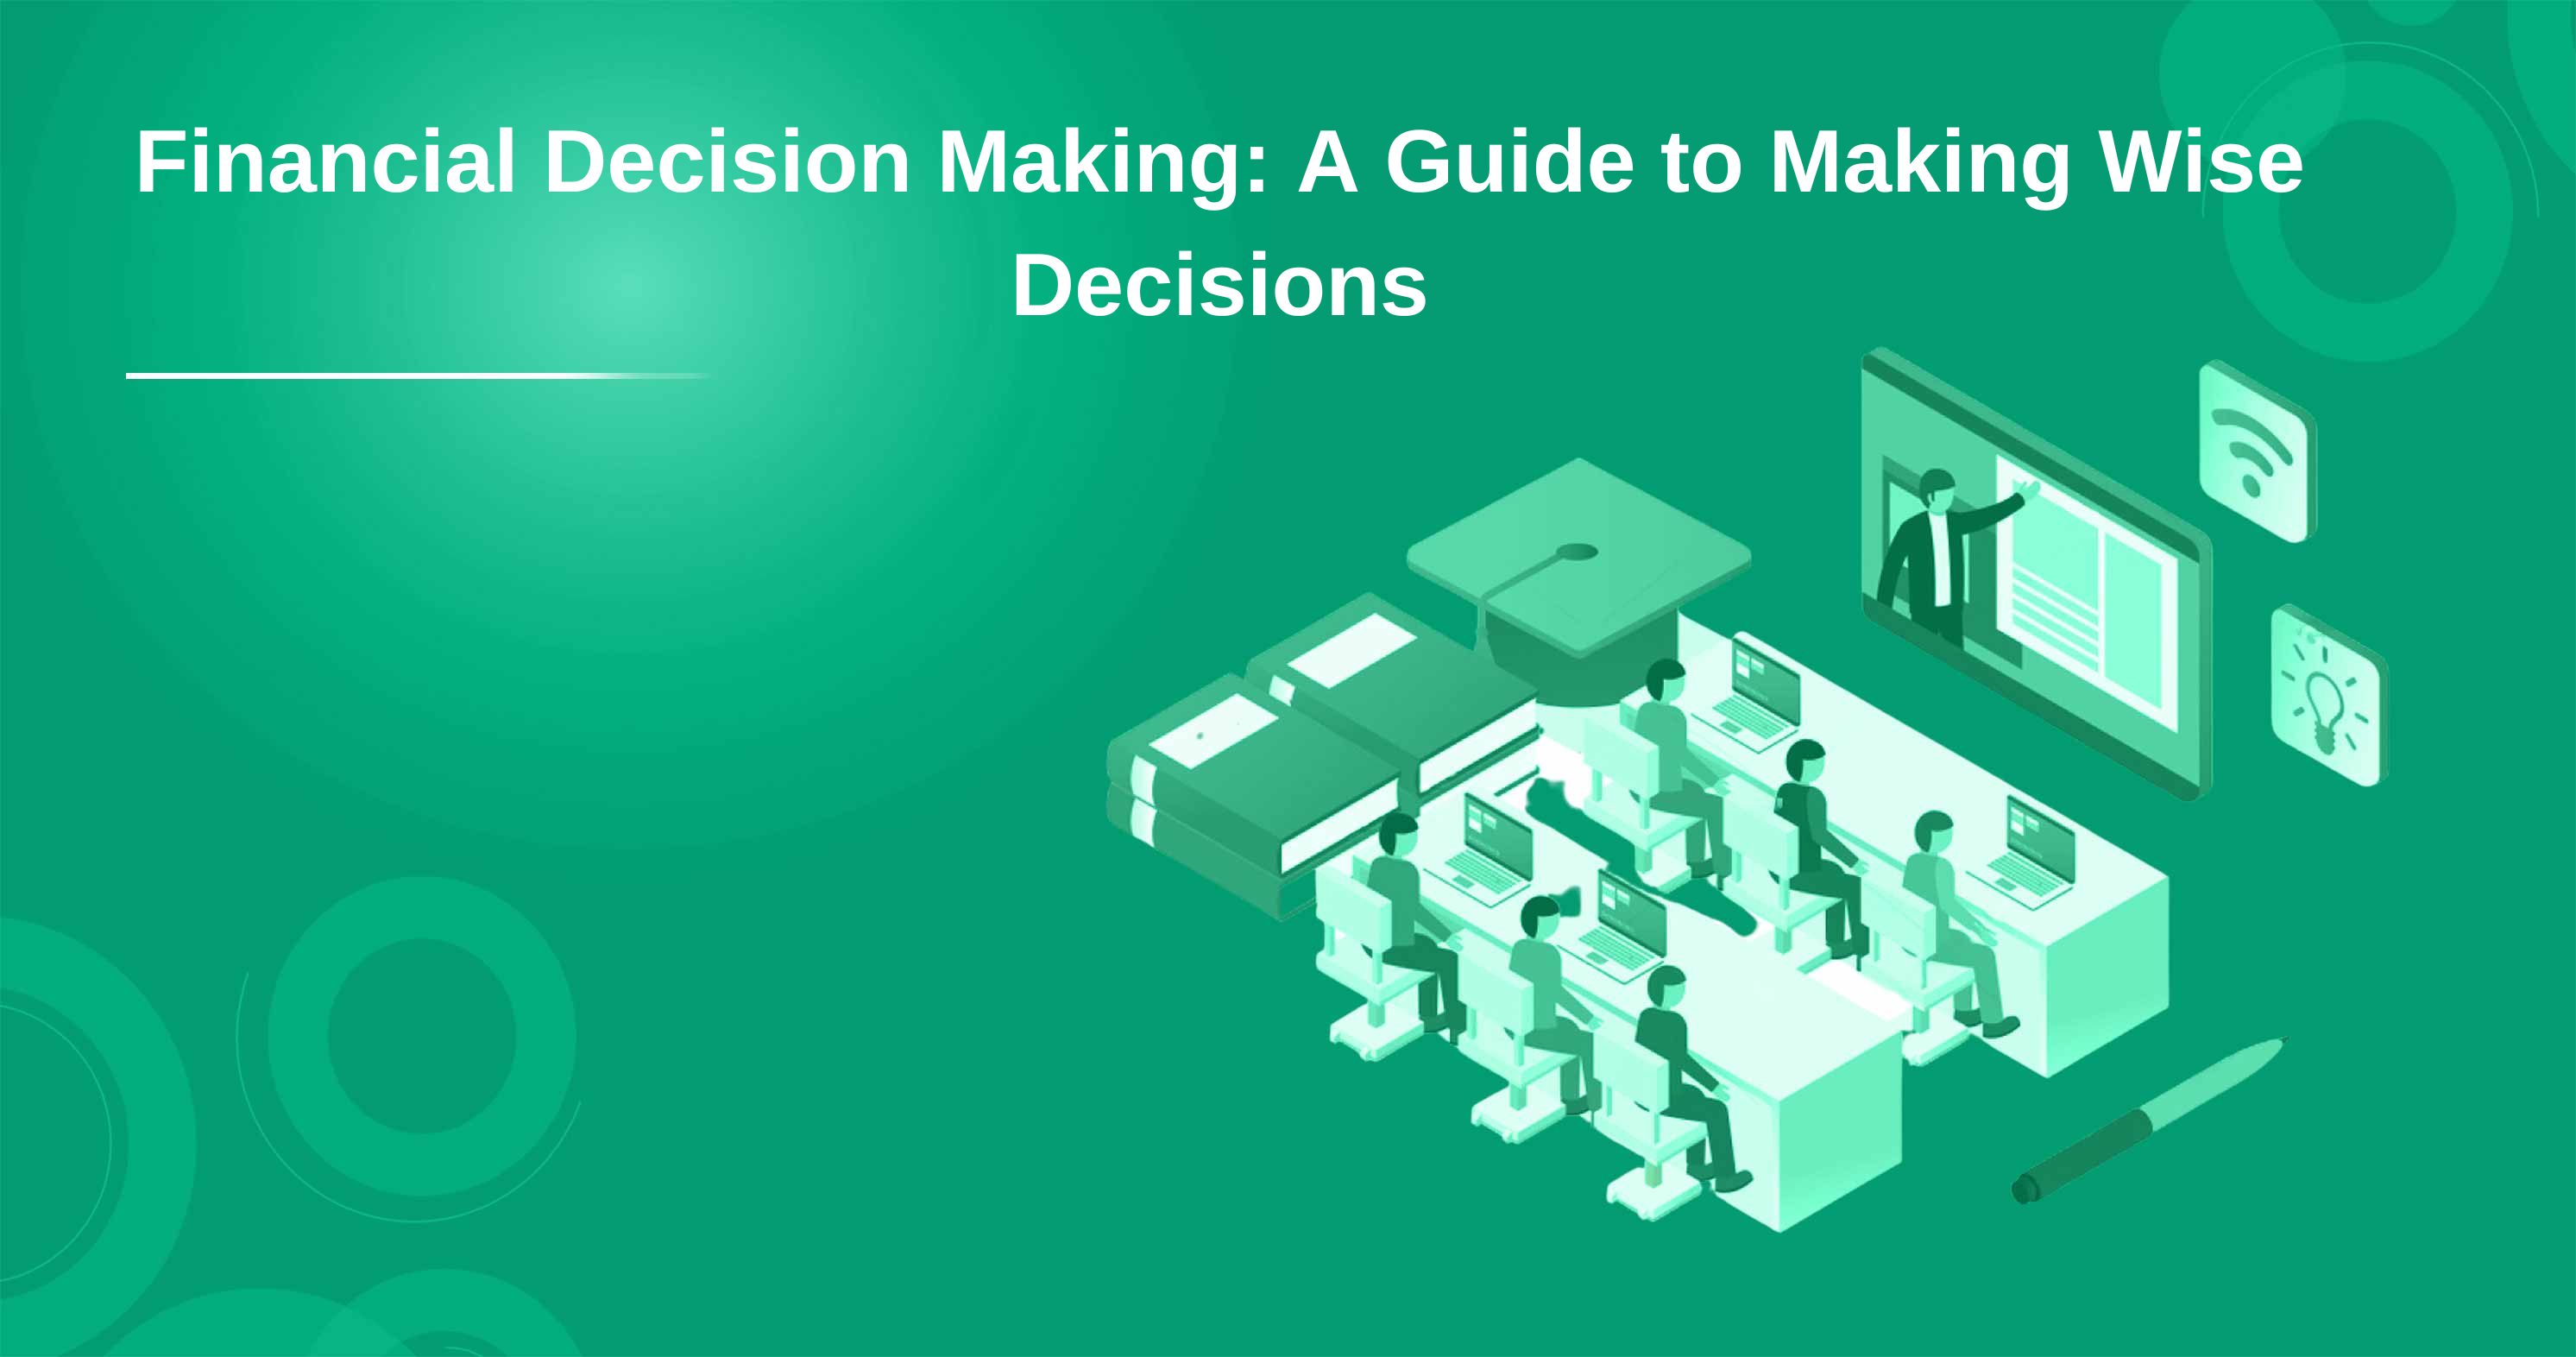 Financial Decision Making: A Guide to Making Wise Decisions